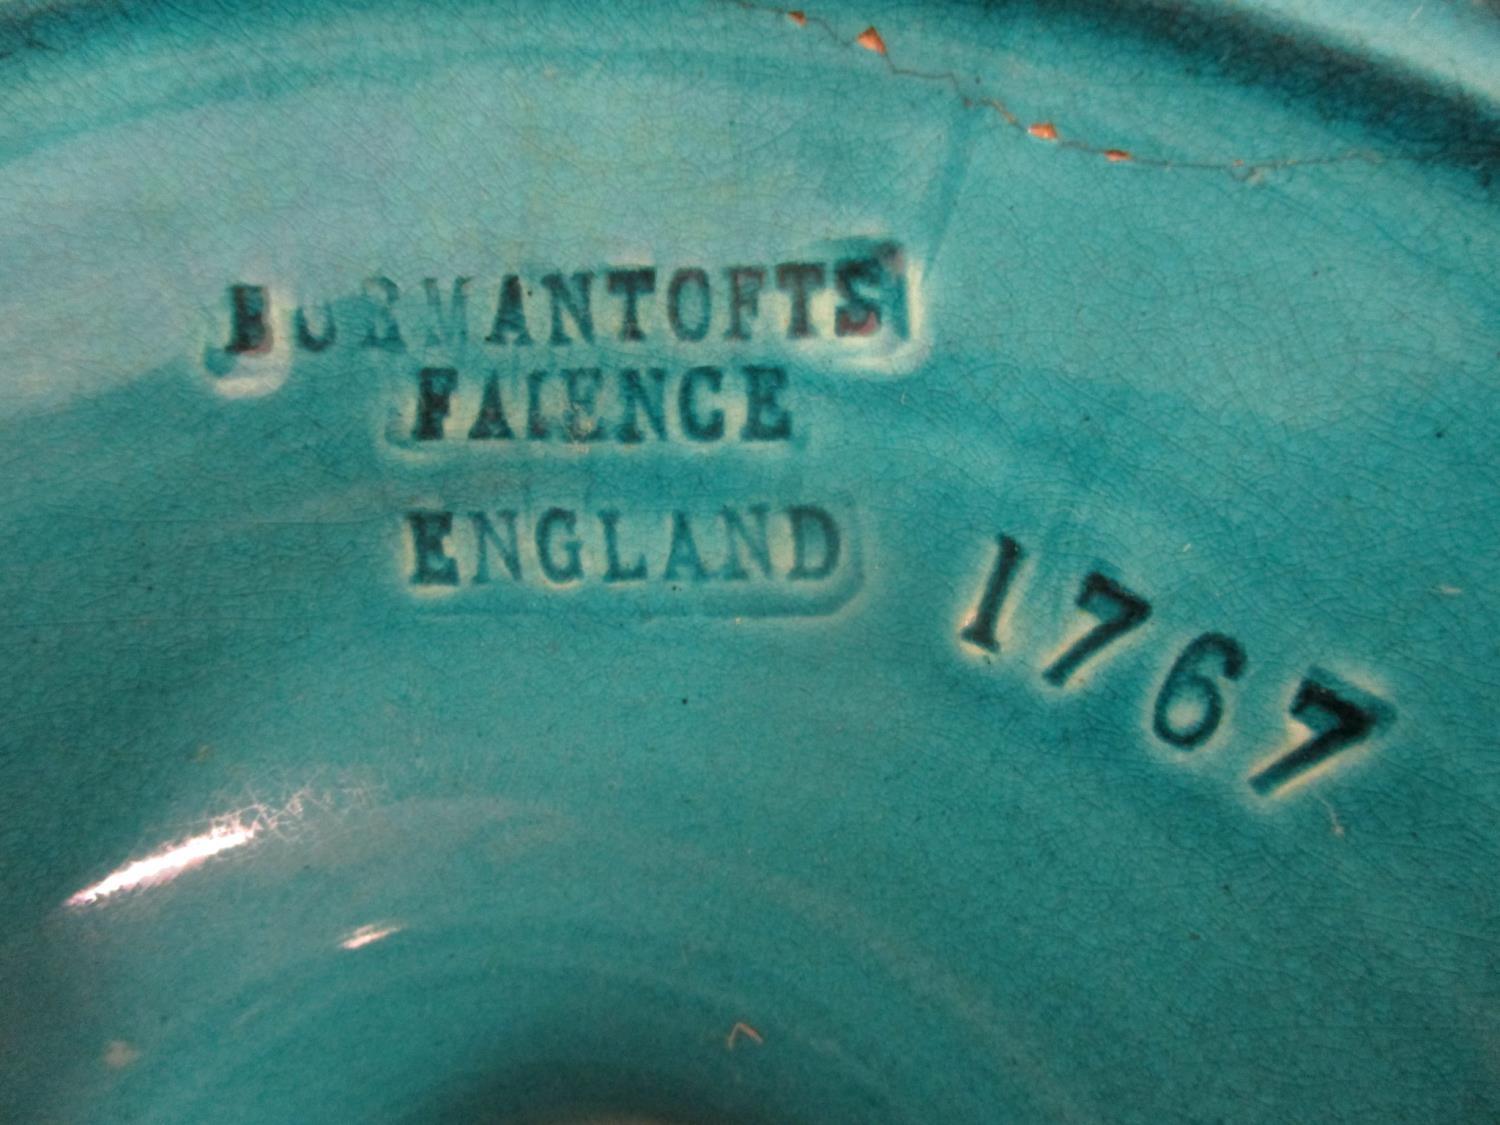 A Burmantoft Faience turquoise glazed Campania pedestal planter with gadrooned ornament on a - Image 4 of 5